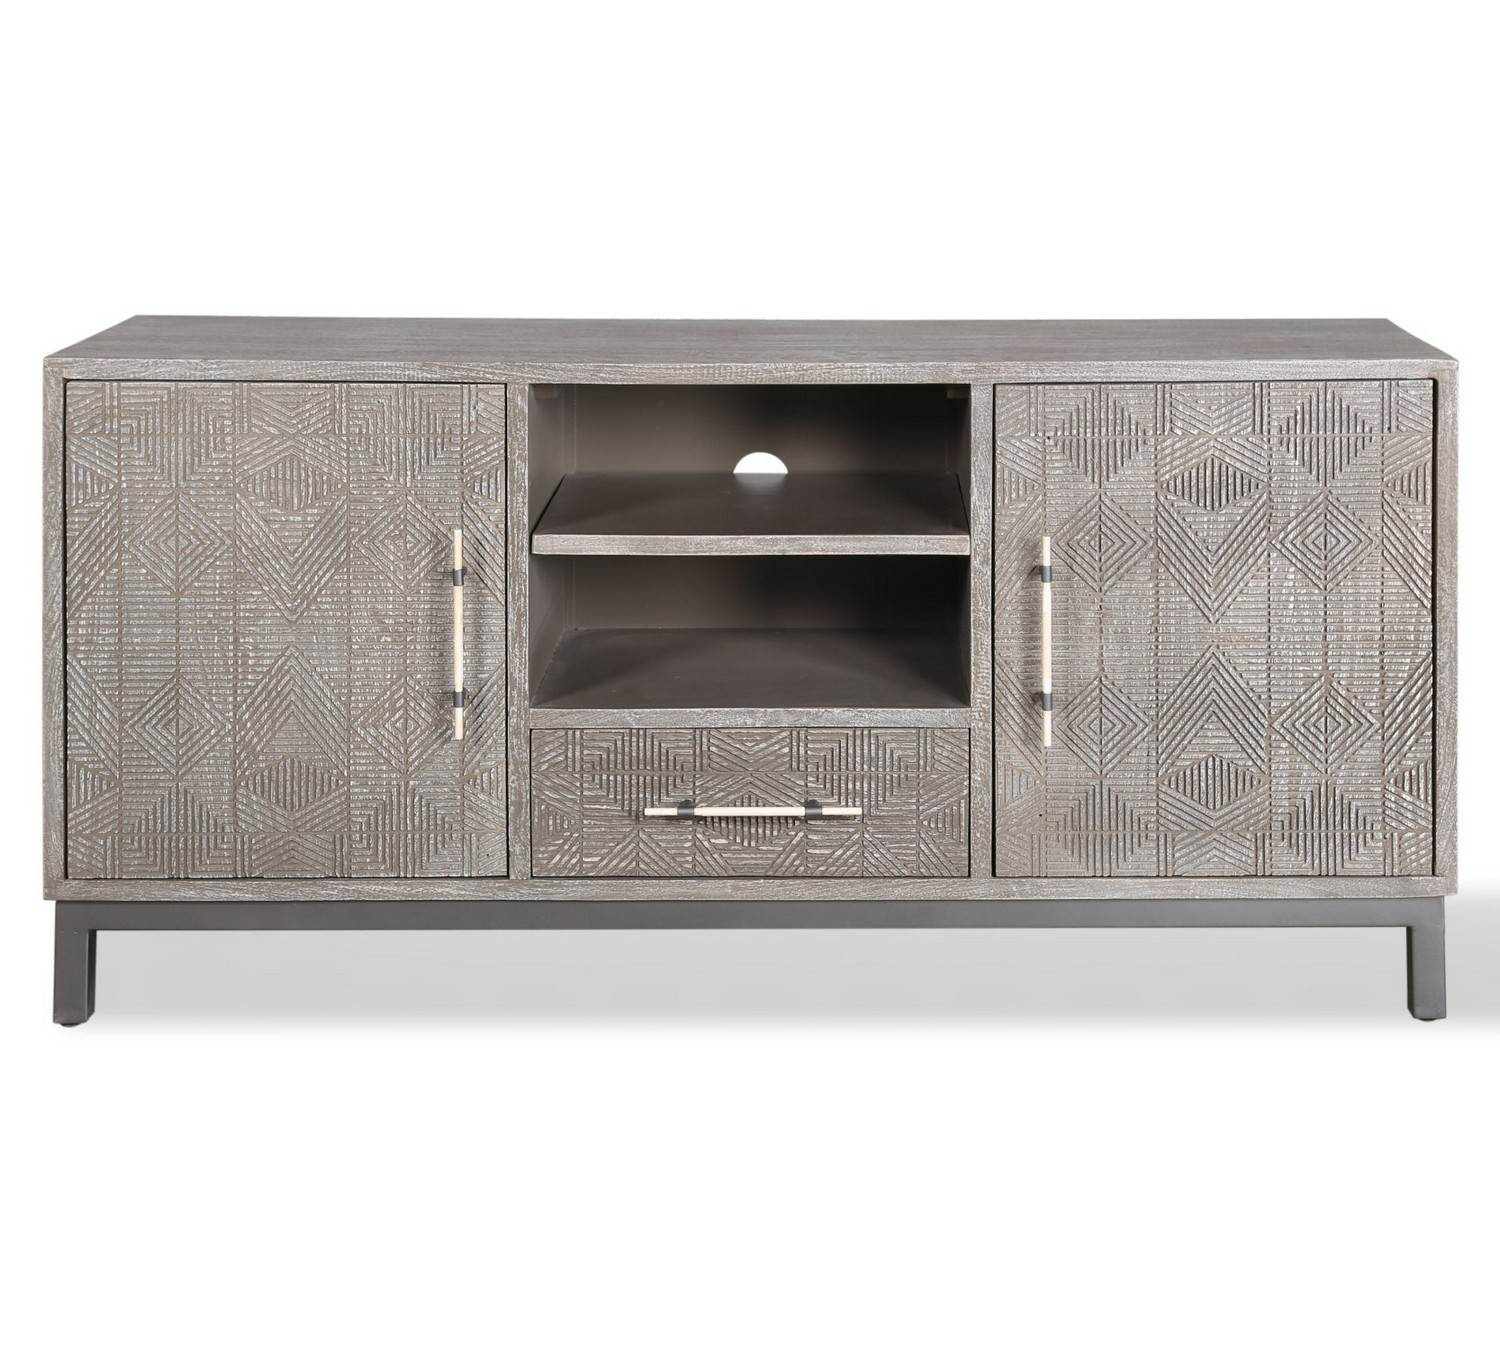 Parker House Crossings Serengeti 66 Inch TV Console - Sandblasted Fossil Grey